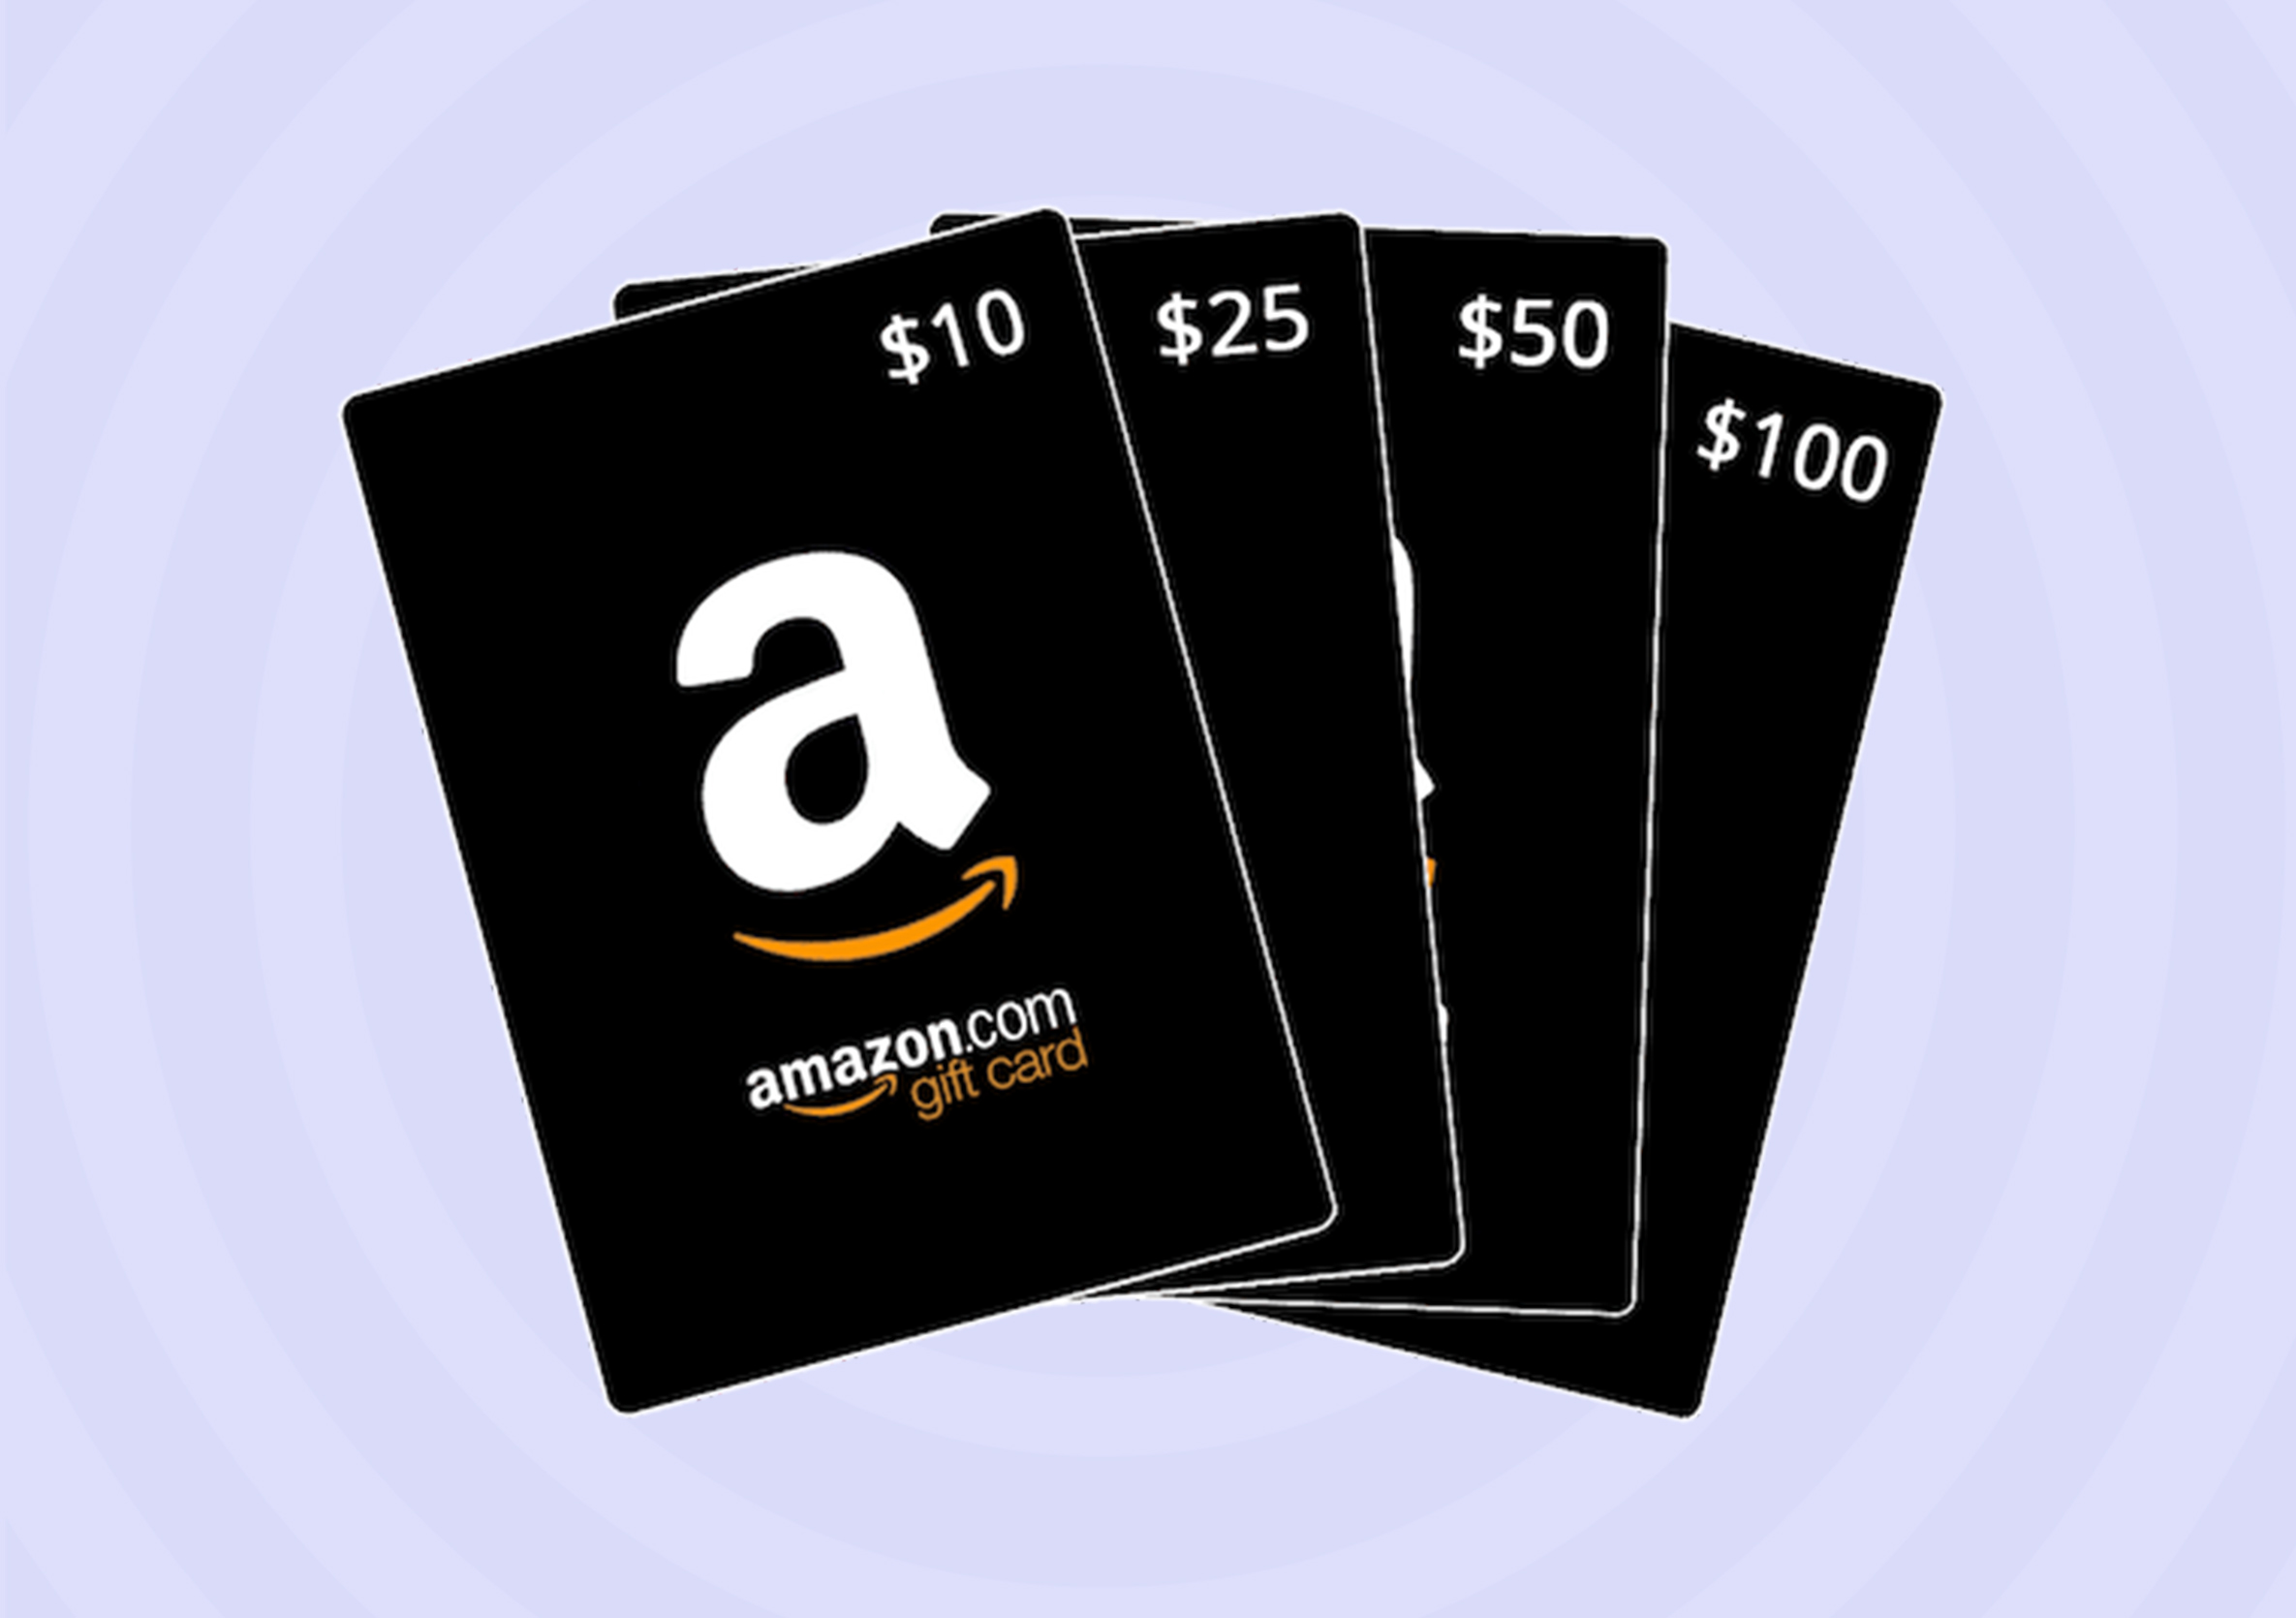 How To Check The Amount On An Amazon Gift Card